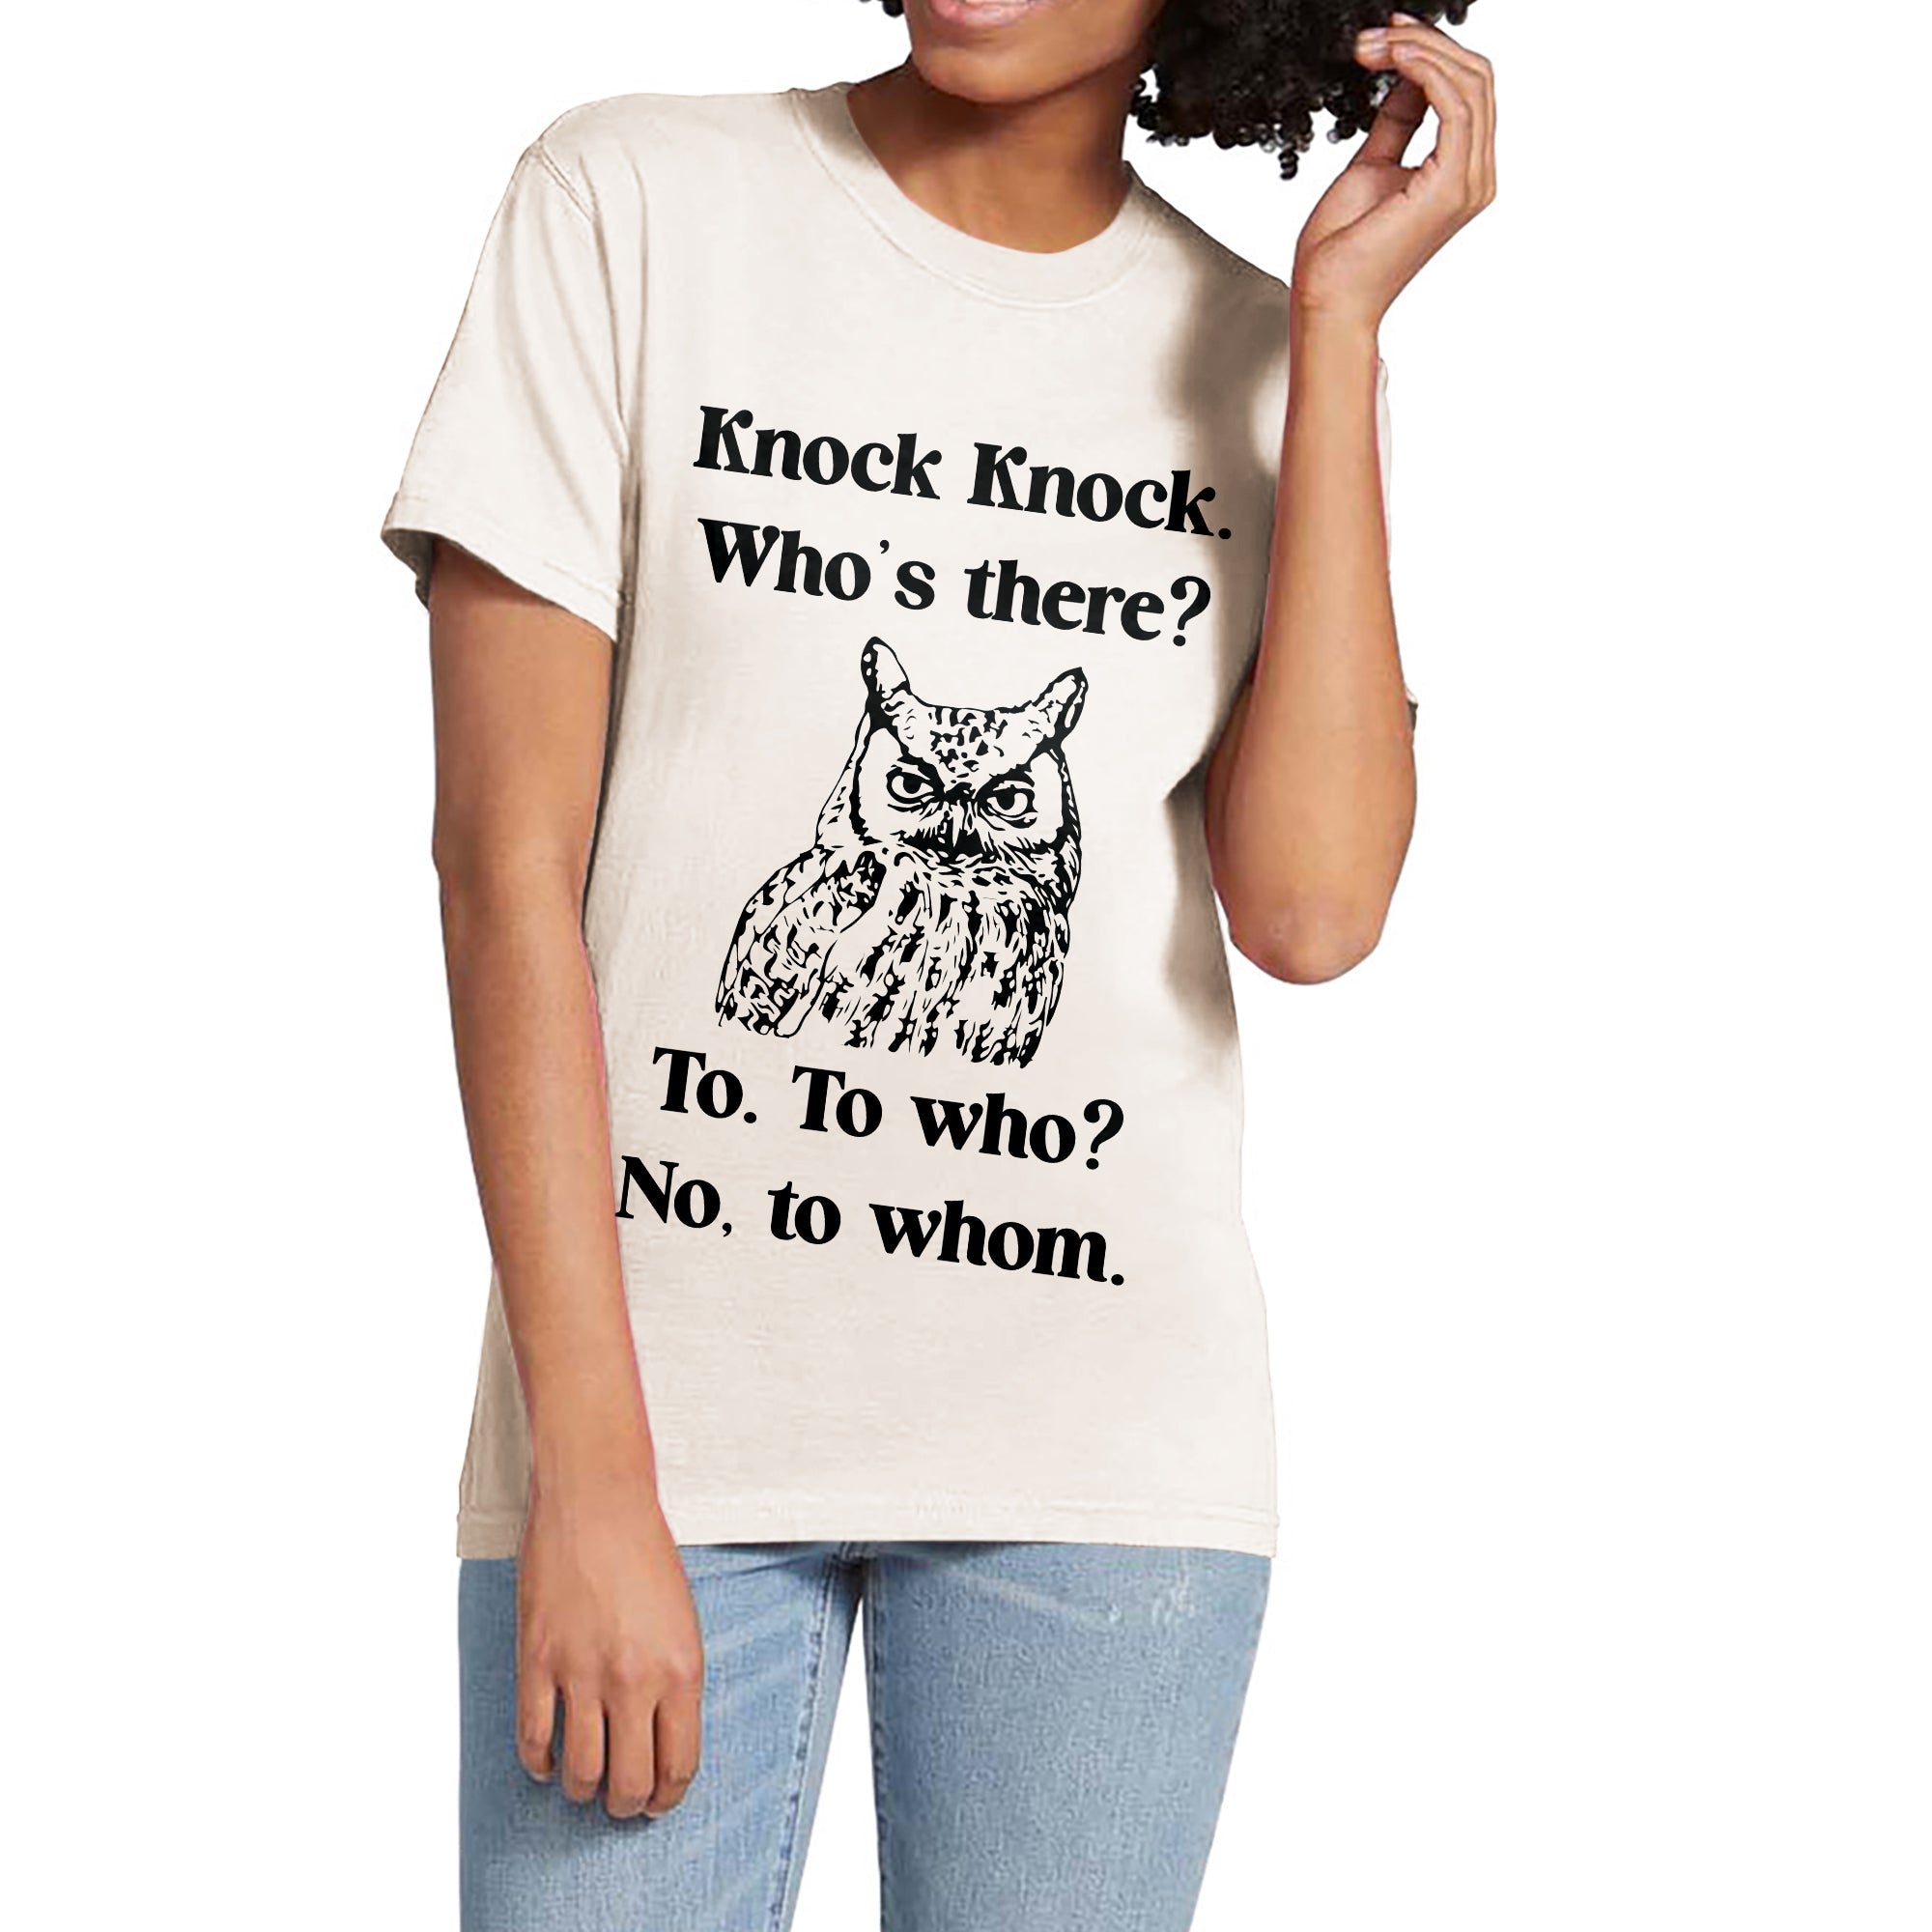 Knock Knock Garment-Dyed Tee - Stories You Can Wear